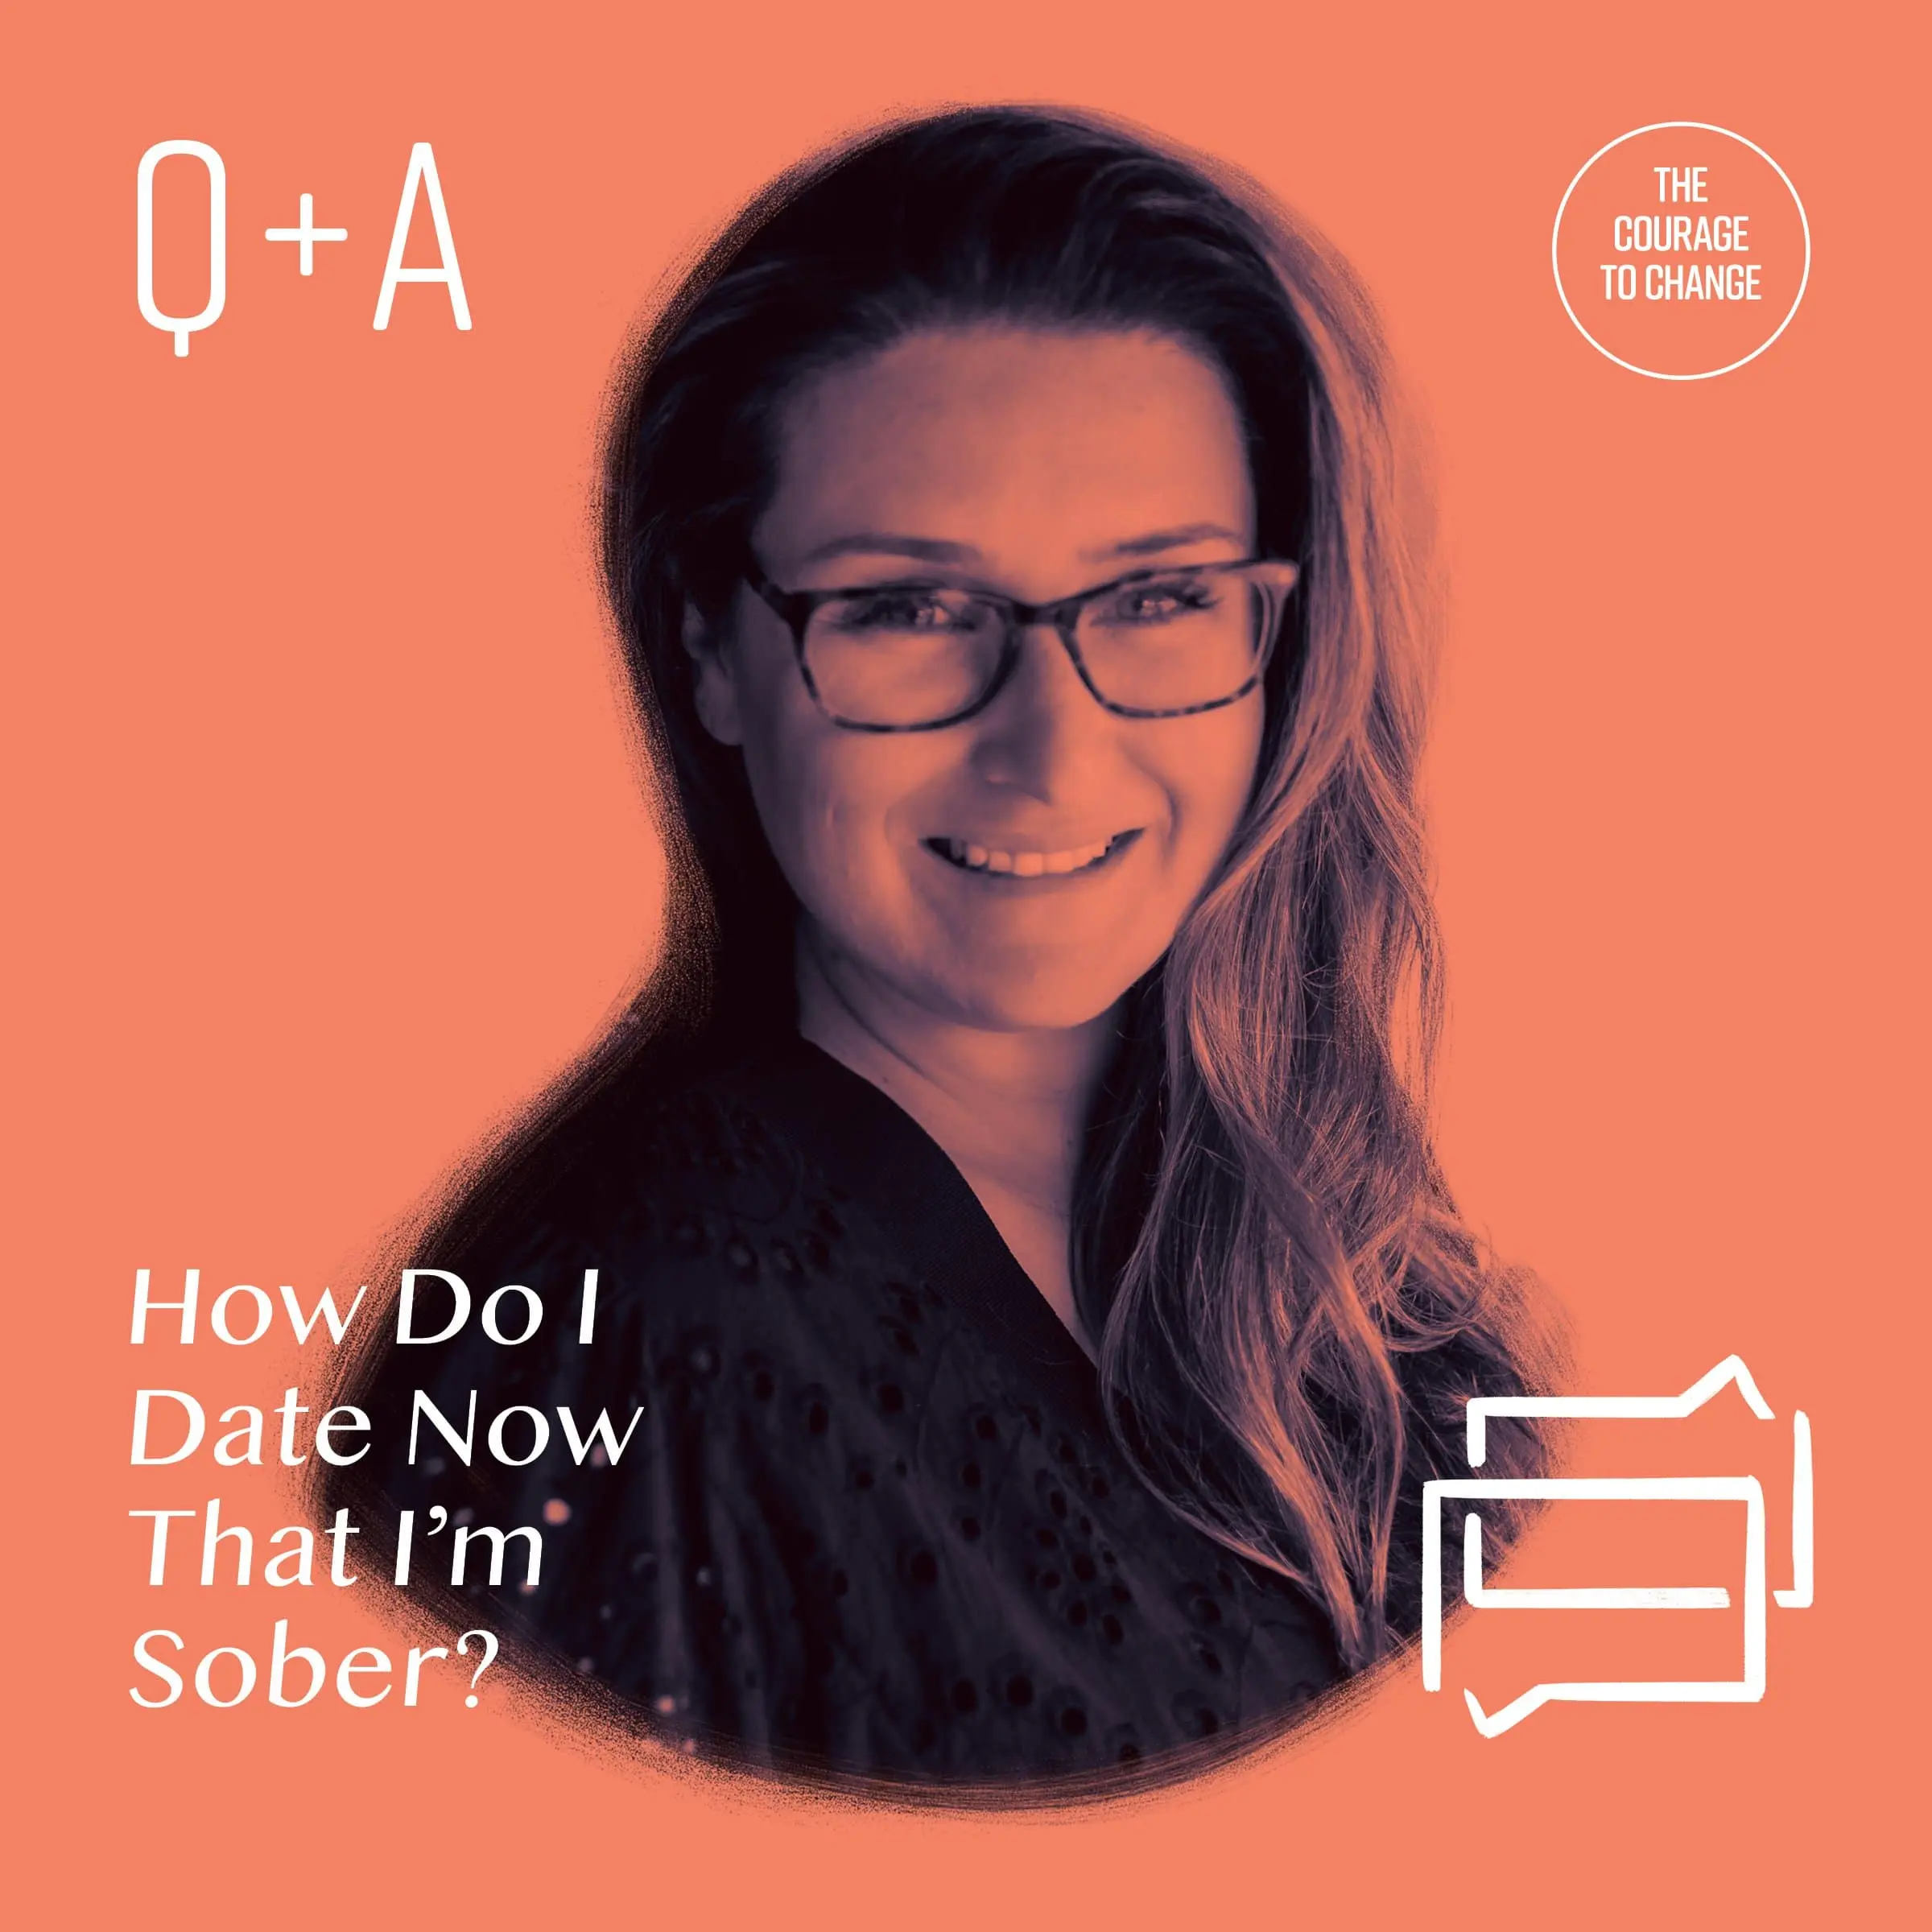 Q+A How Do I Date Now That I’m Sober?